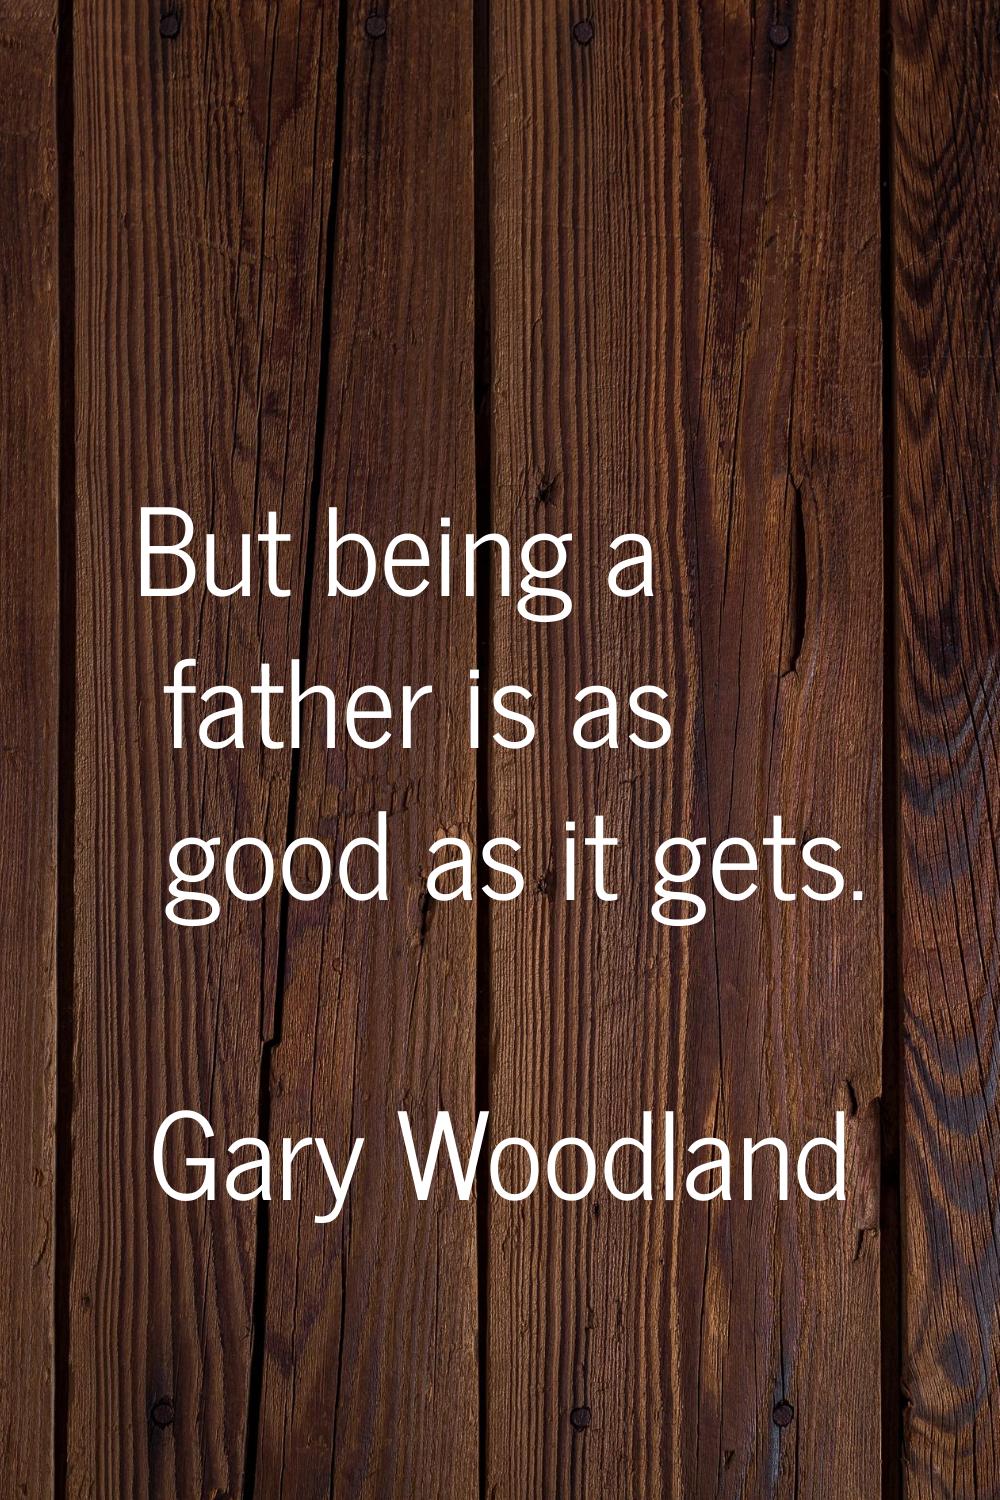 But being a father is as good as it gets.